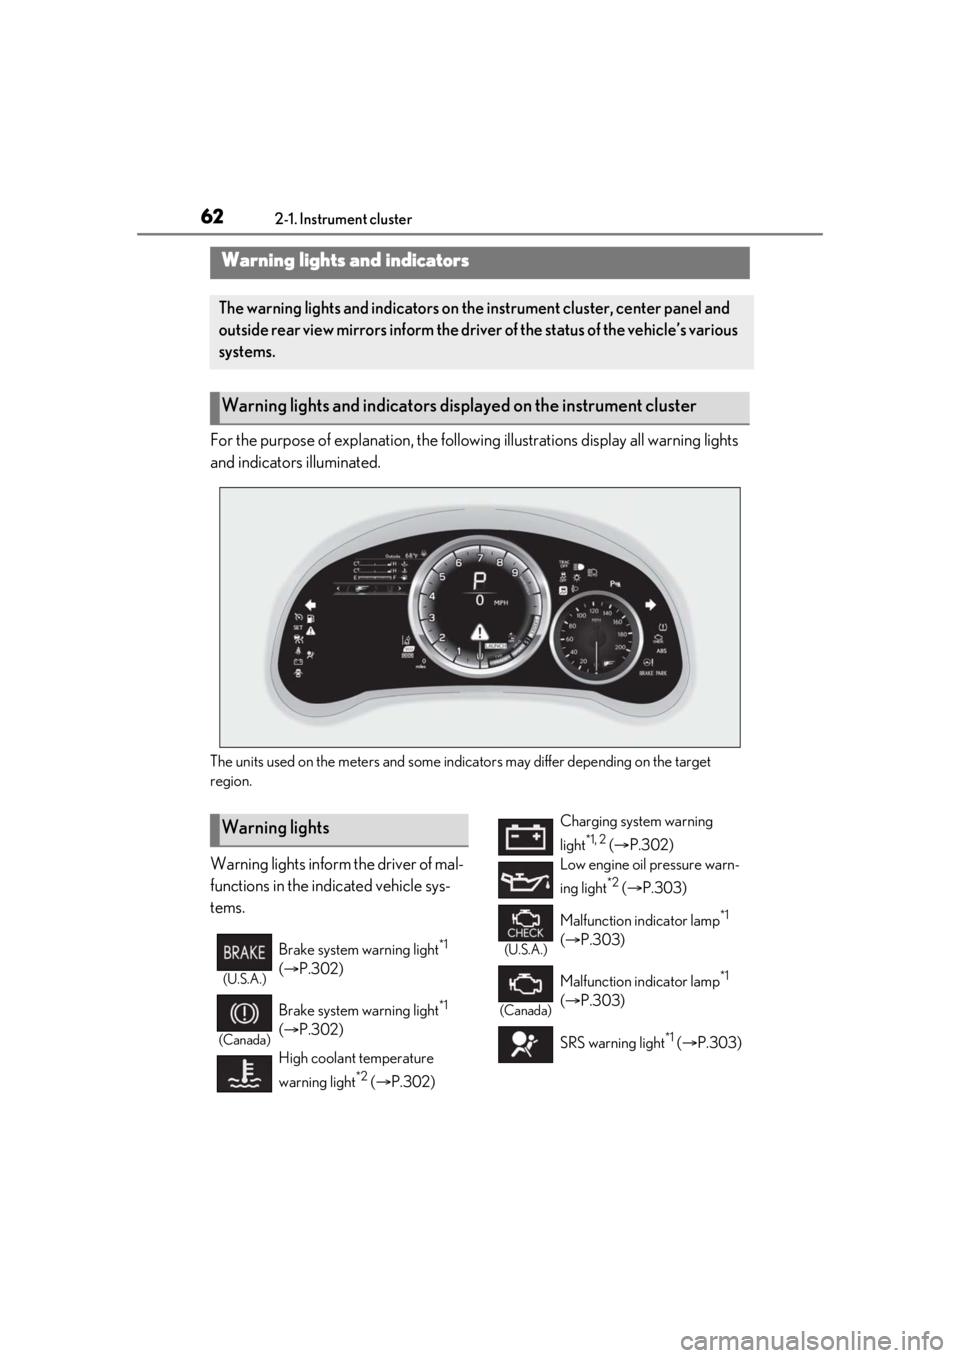 LEXUS RCF 2021  Owners Manual 622-1. Instrument cluster
2-1.Instrument cluster
For the purpose of explanation, the following illustrations display all warning lights 
and indicators illuminated.
The units used on the meters and so